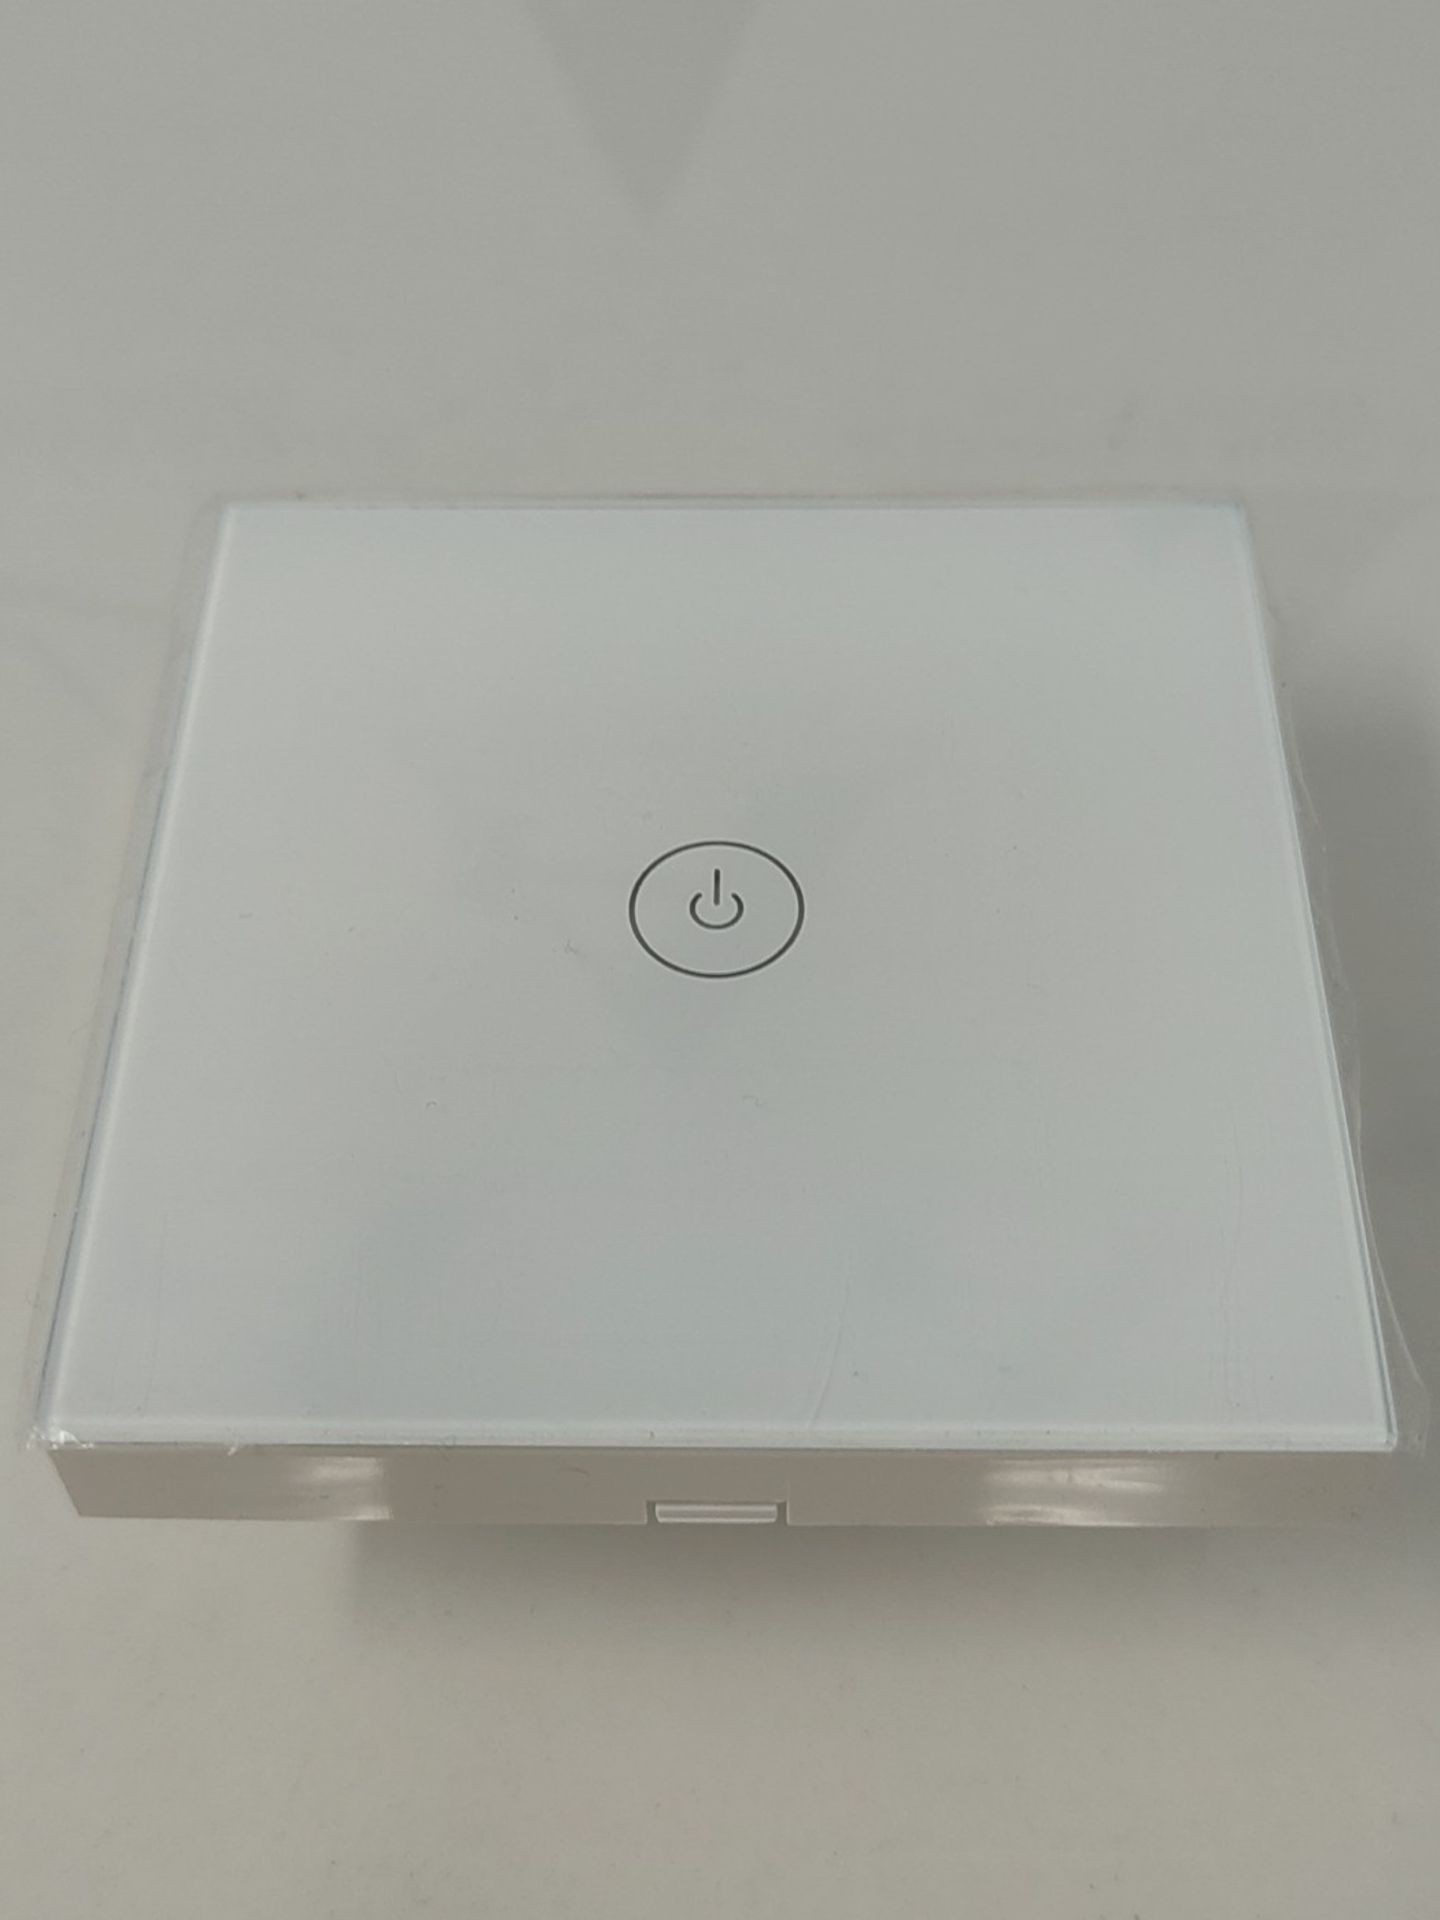 TCP Smart Wi-Fi Single Gang Wall Switch, white,packaging may vary - Image 3 of 3